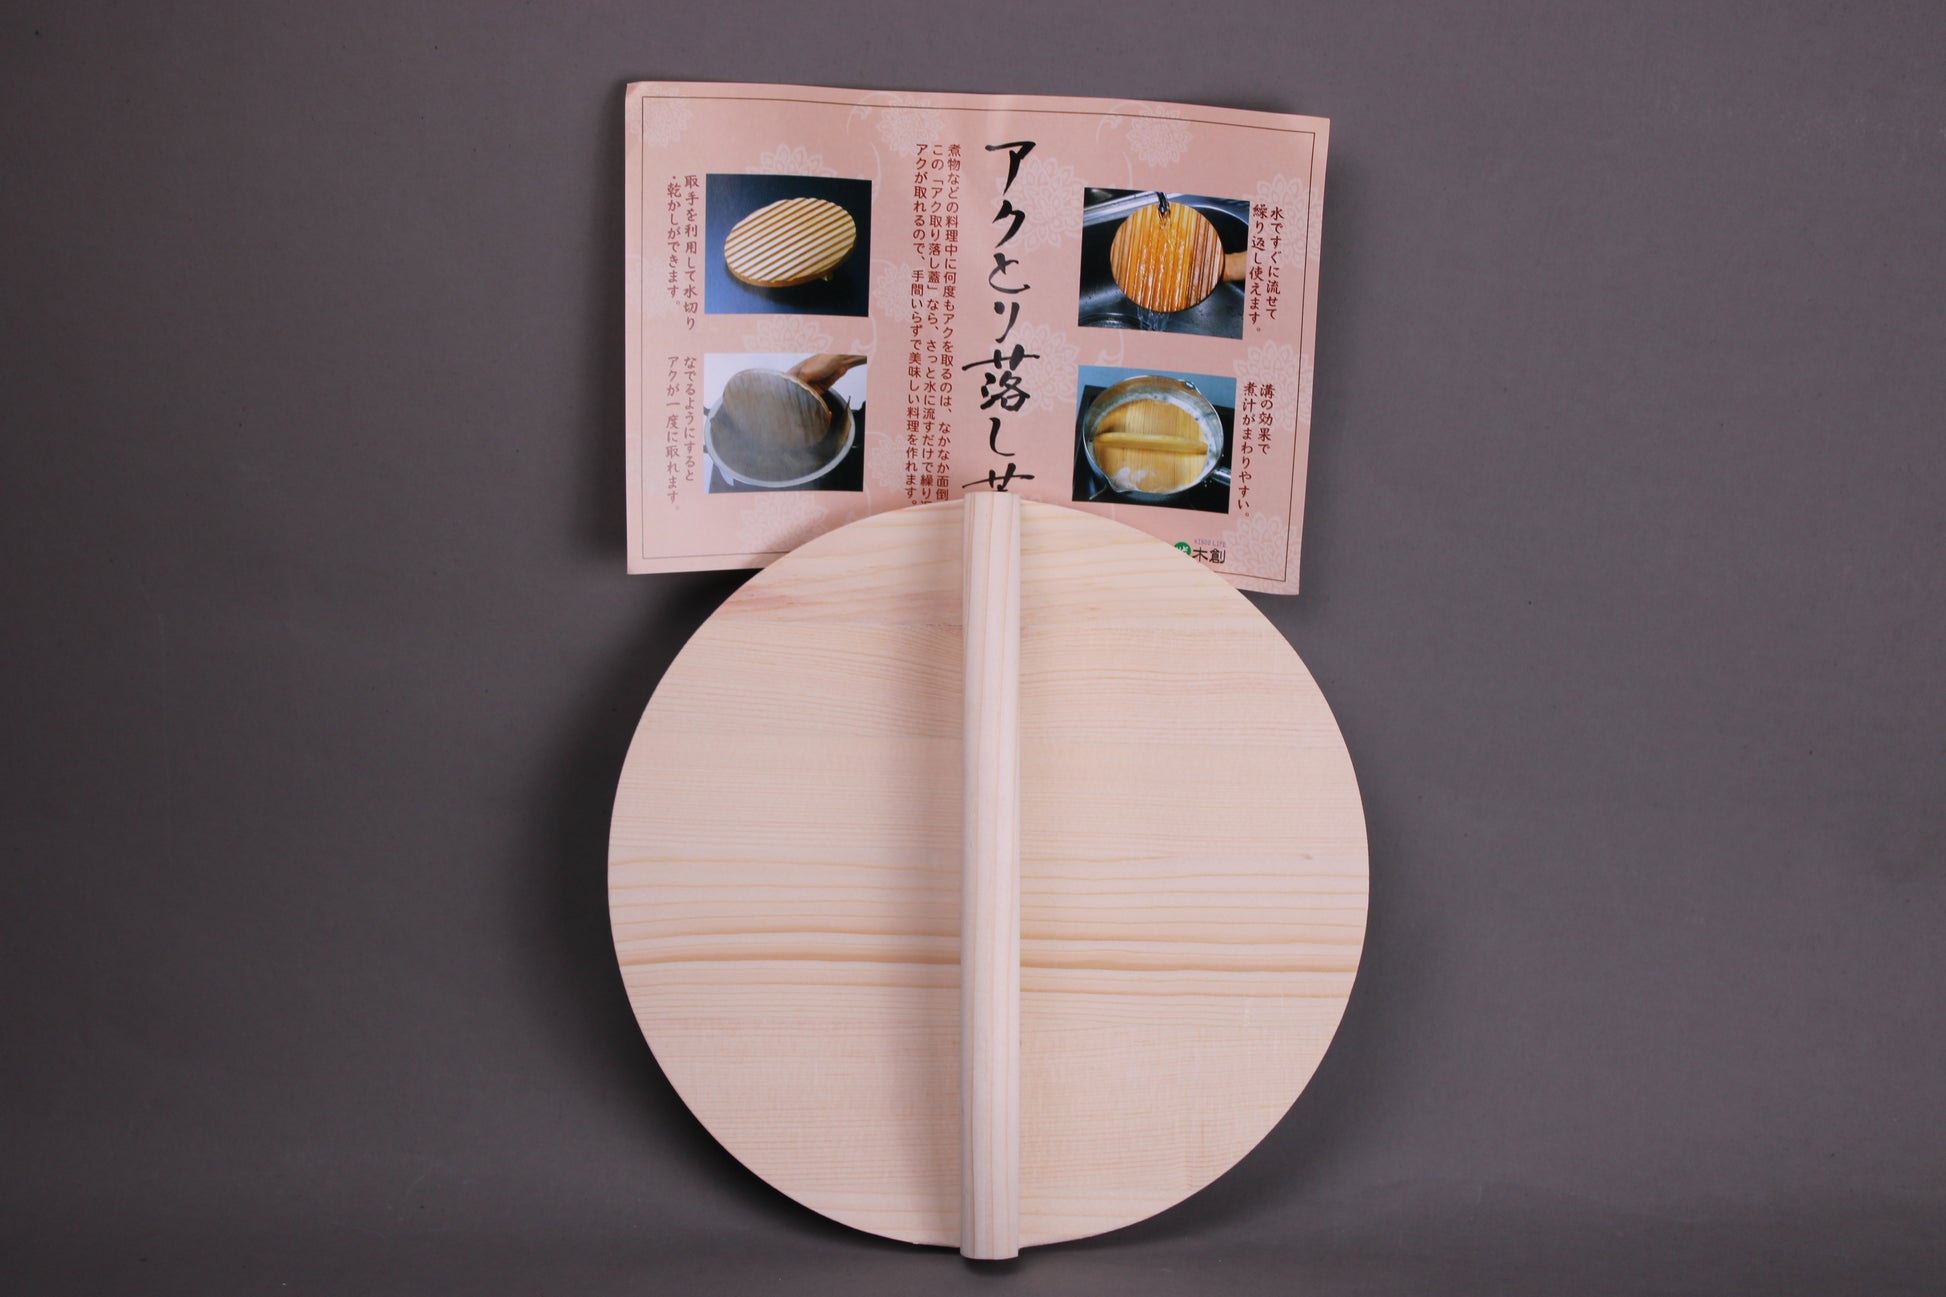 wooden drop lid skimmer otoshibuta for nimono by yamacoh youbi kisou life beside product paper with hiragana stating brand and product front side